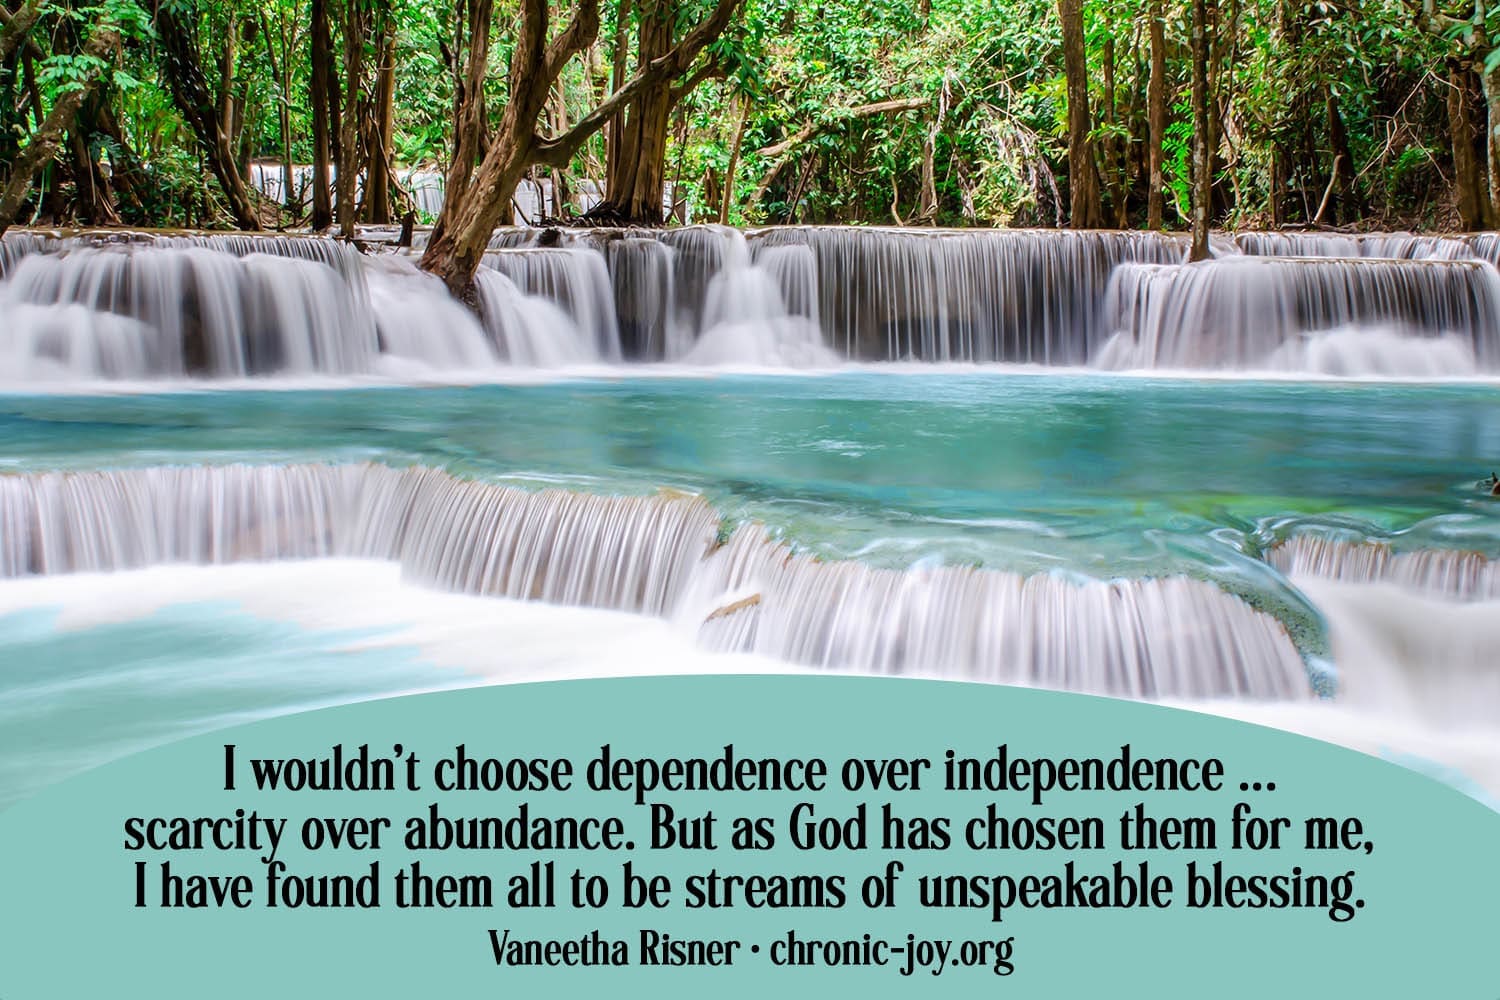 "I wouldn’t choose dependence over independence. I wouldn’t choose scarcity over abundance. But as God has chosen them for me, I have found them all to be streams of unspeakable blessing." Vaneetha Risner